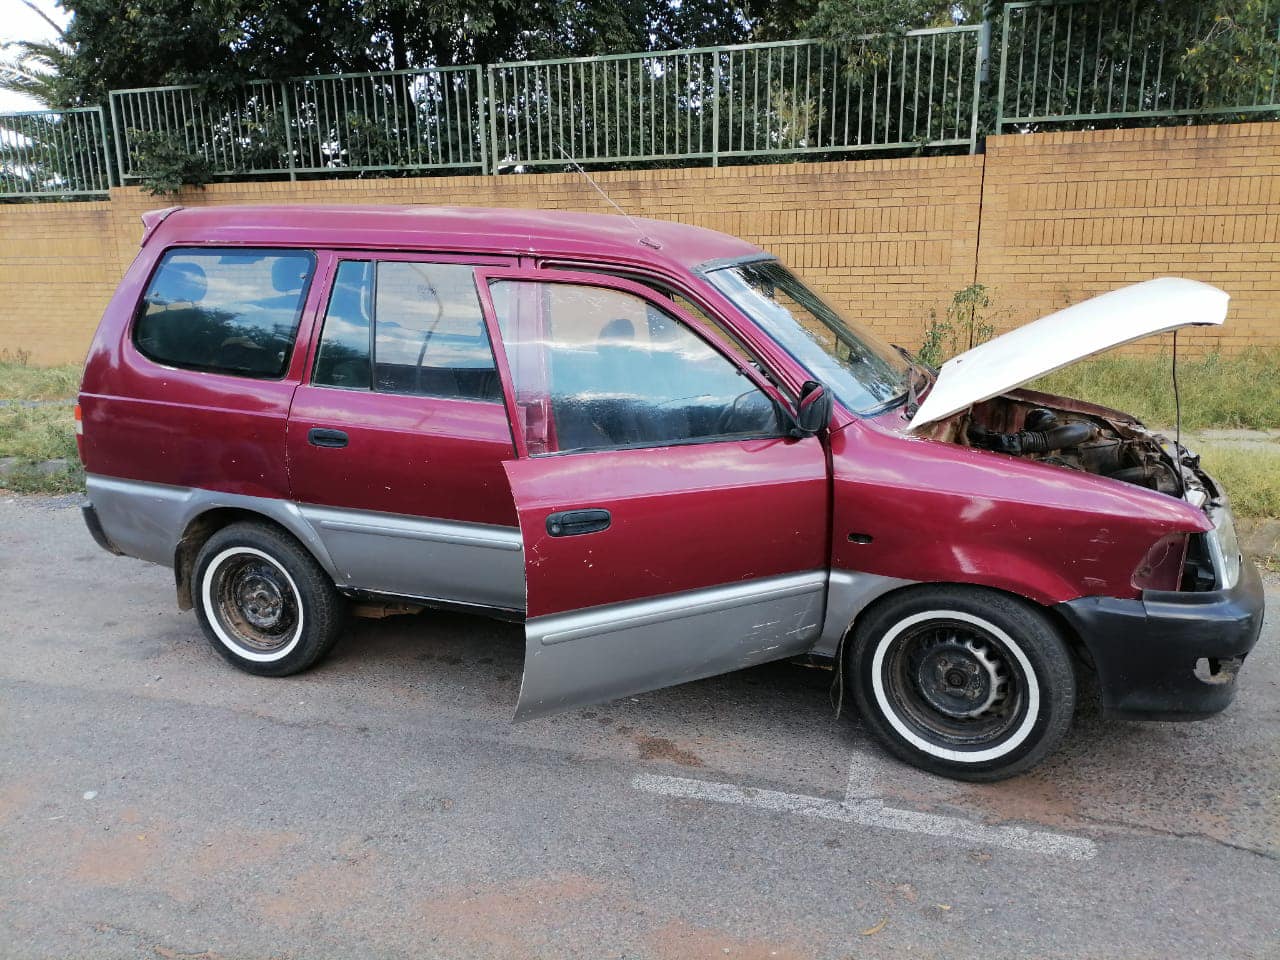 A stolen vehicle was recovered and one suspect arrested in Benoni